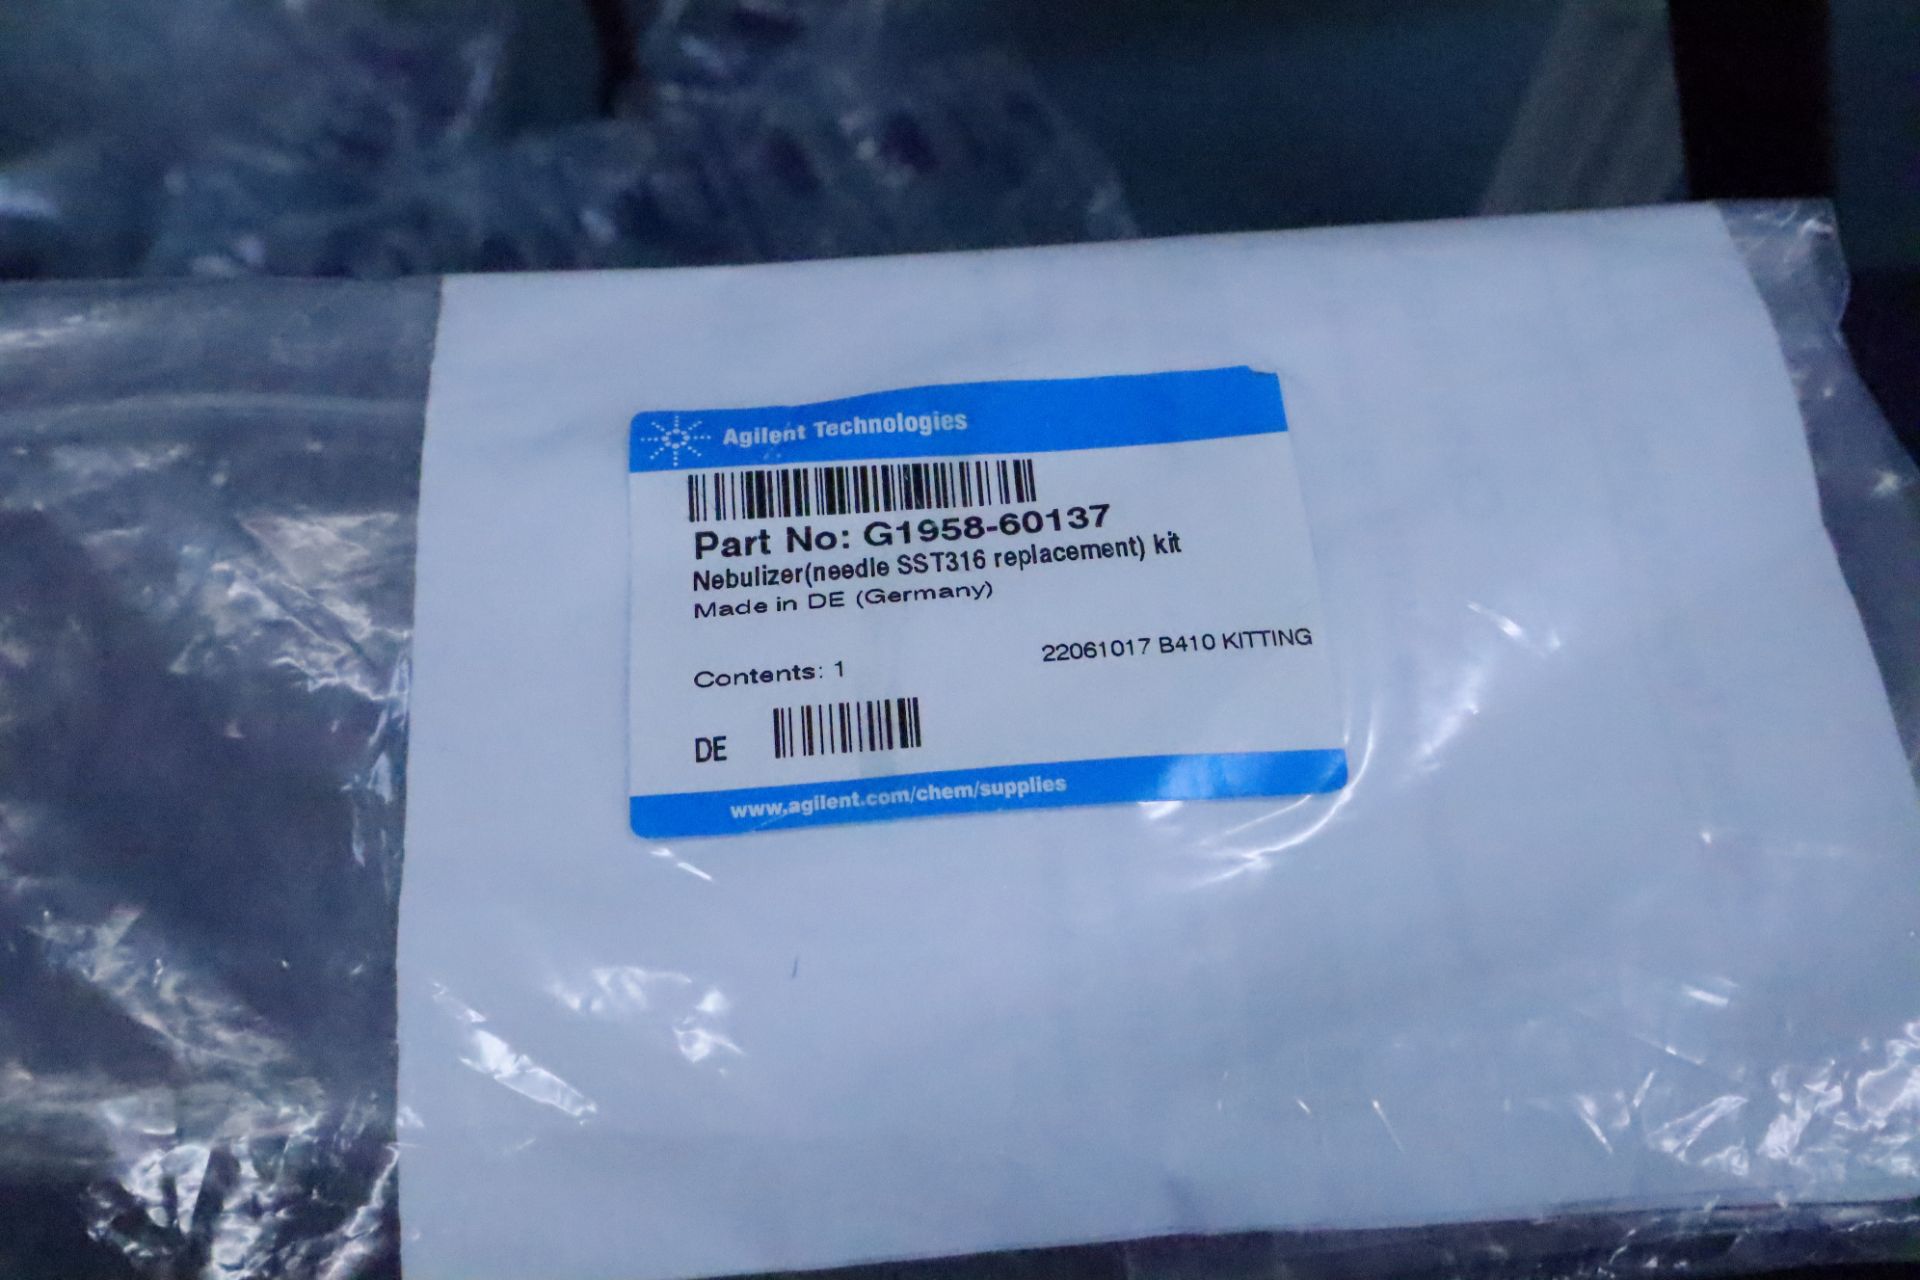 (NIB) Agilent Technologies OEM Replacement Parts for LC/MS Machines - Image 5 of 28